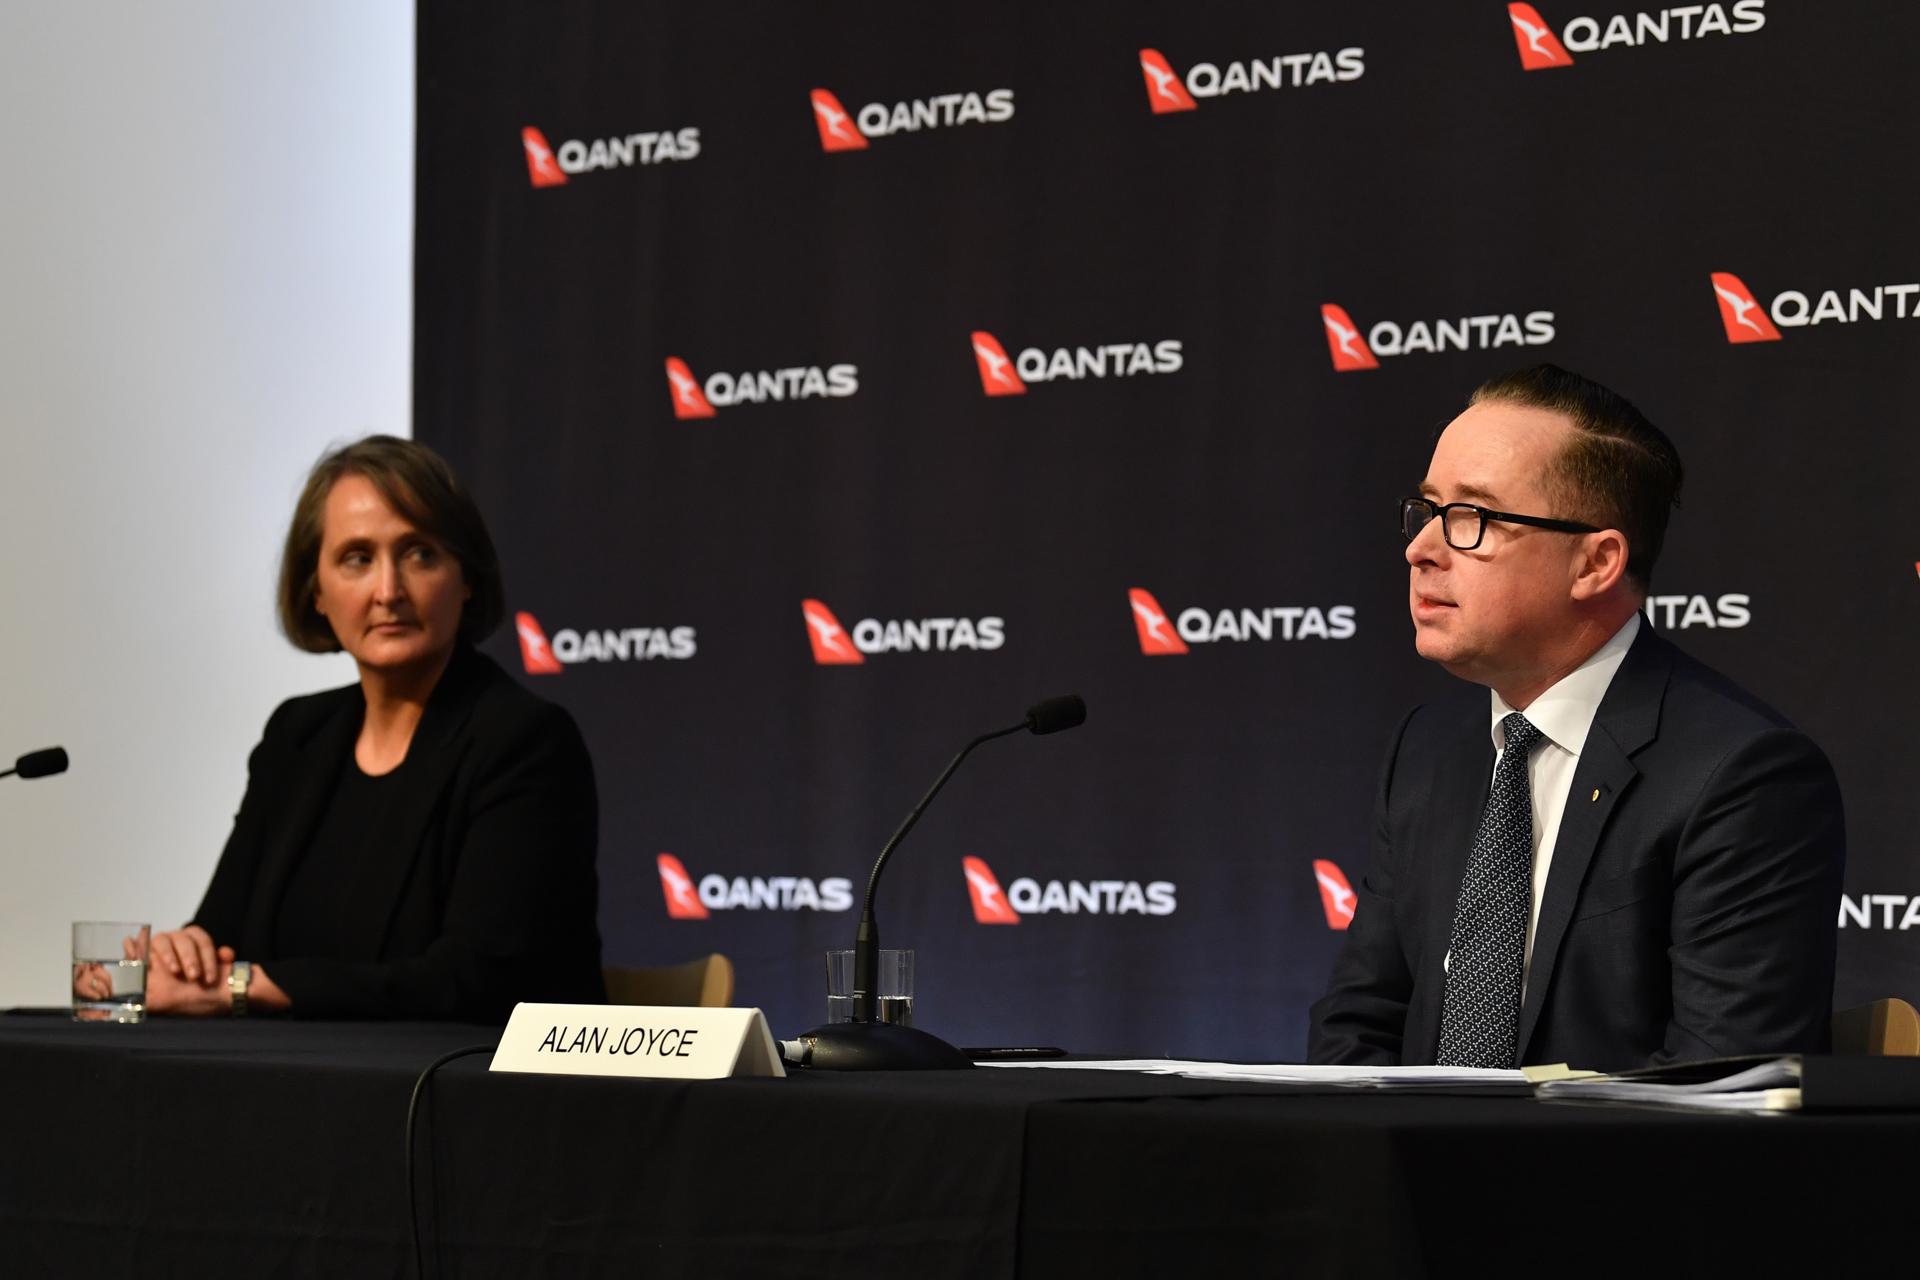 Qantas Group Chief Executive Officer Alan Joyce (R) and Qantas Group Chief Financial Officer Vanessa Hudson (L) during the company's results announcement press conference in Sydney, Australia, 20 August 2020. EFE-EPA FILE/DEAN LEWINS AUSTRALIA AND NEW ZEALAND OUT
